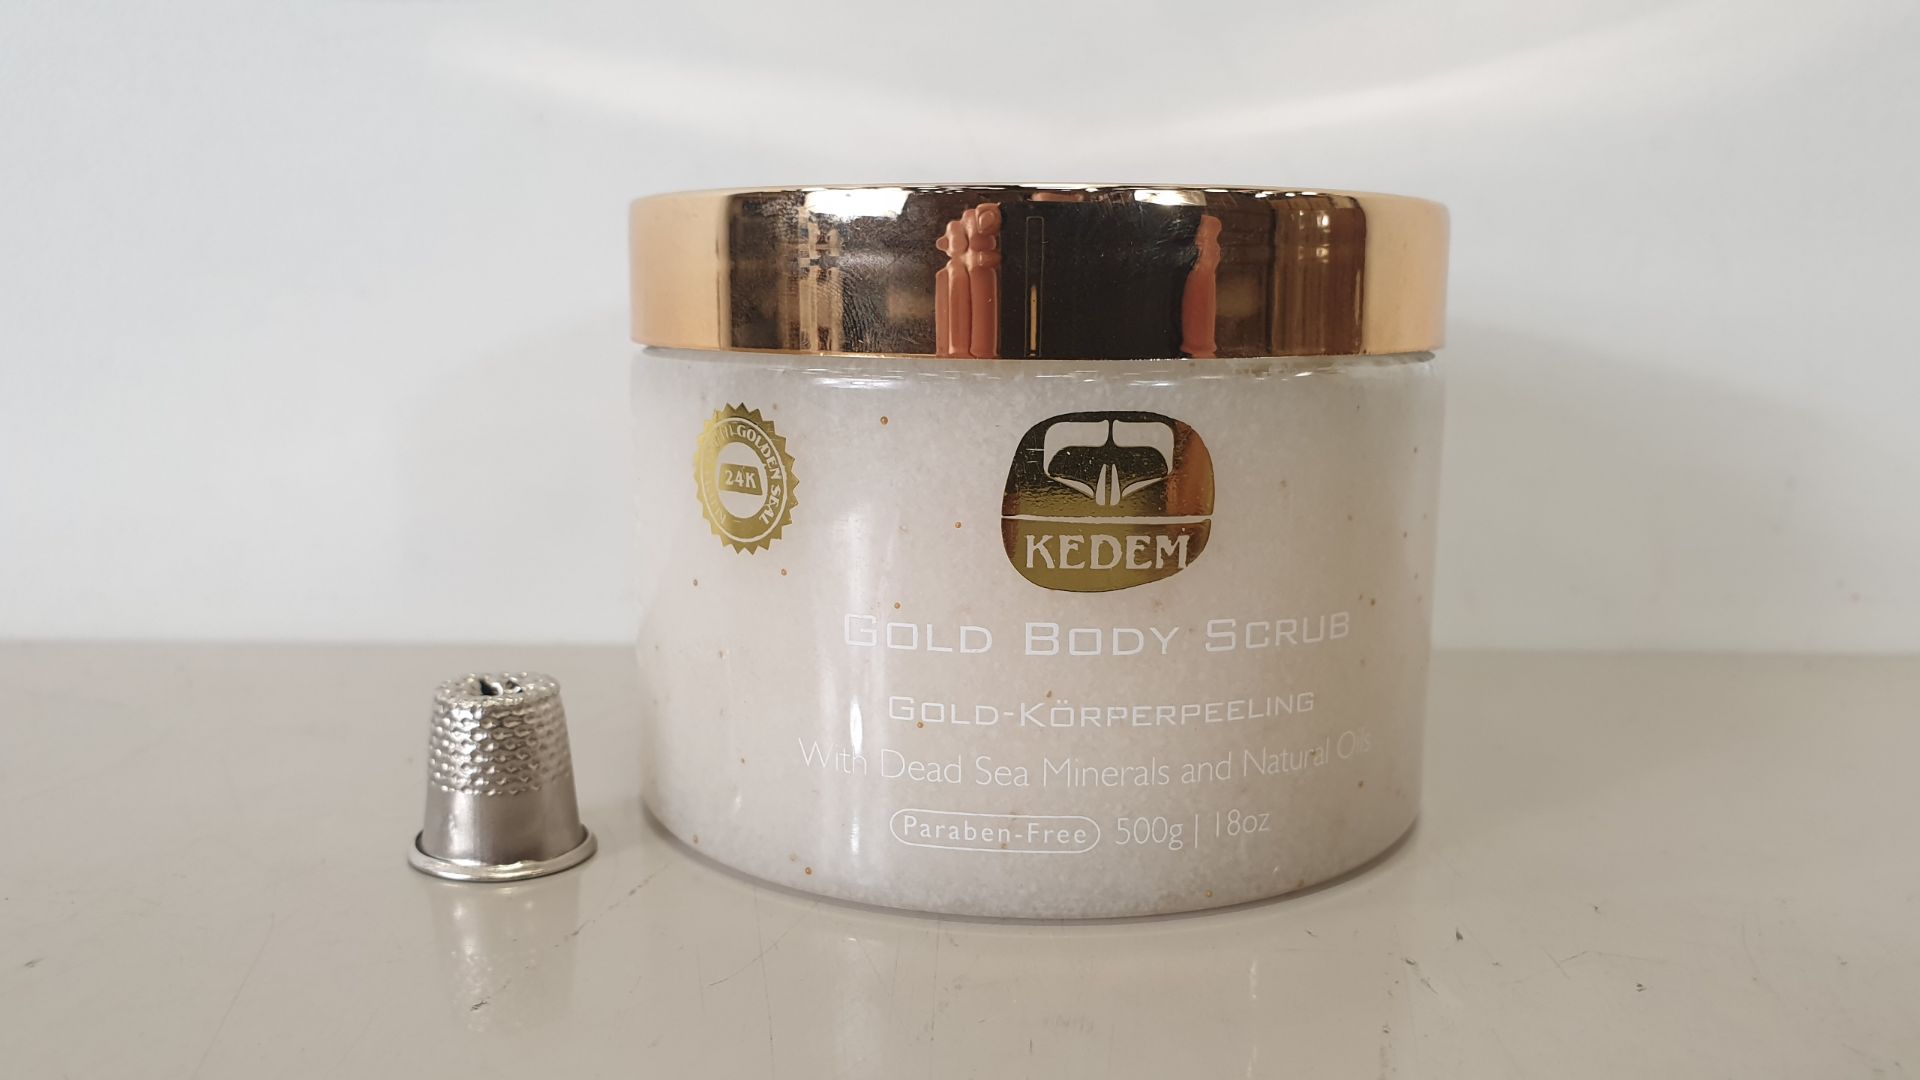 6 X BRAND NEW KEDEM GOLD BODY SCRUB WITH DEAD SEA MINERALS AND NATURAL OILS (PARABEN-FREE) - 500G